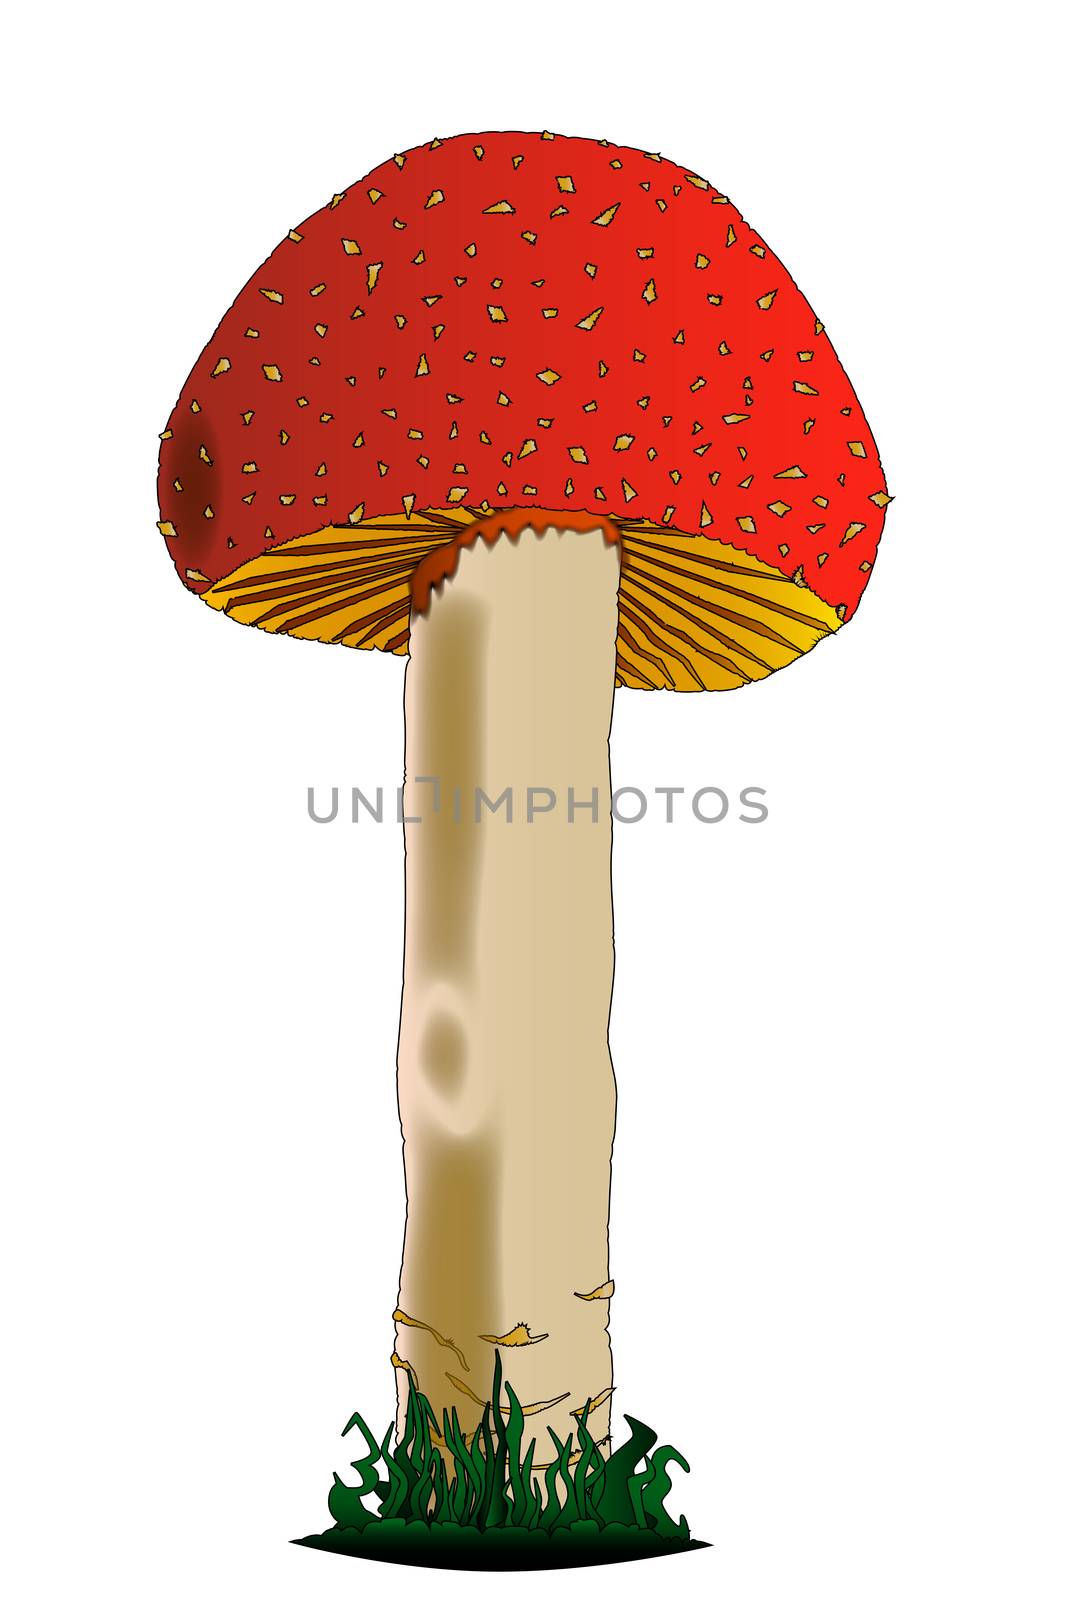 A red and white edible mushroom isolated on a white background.